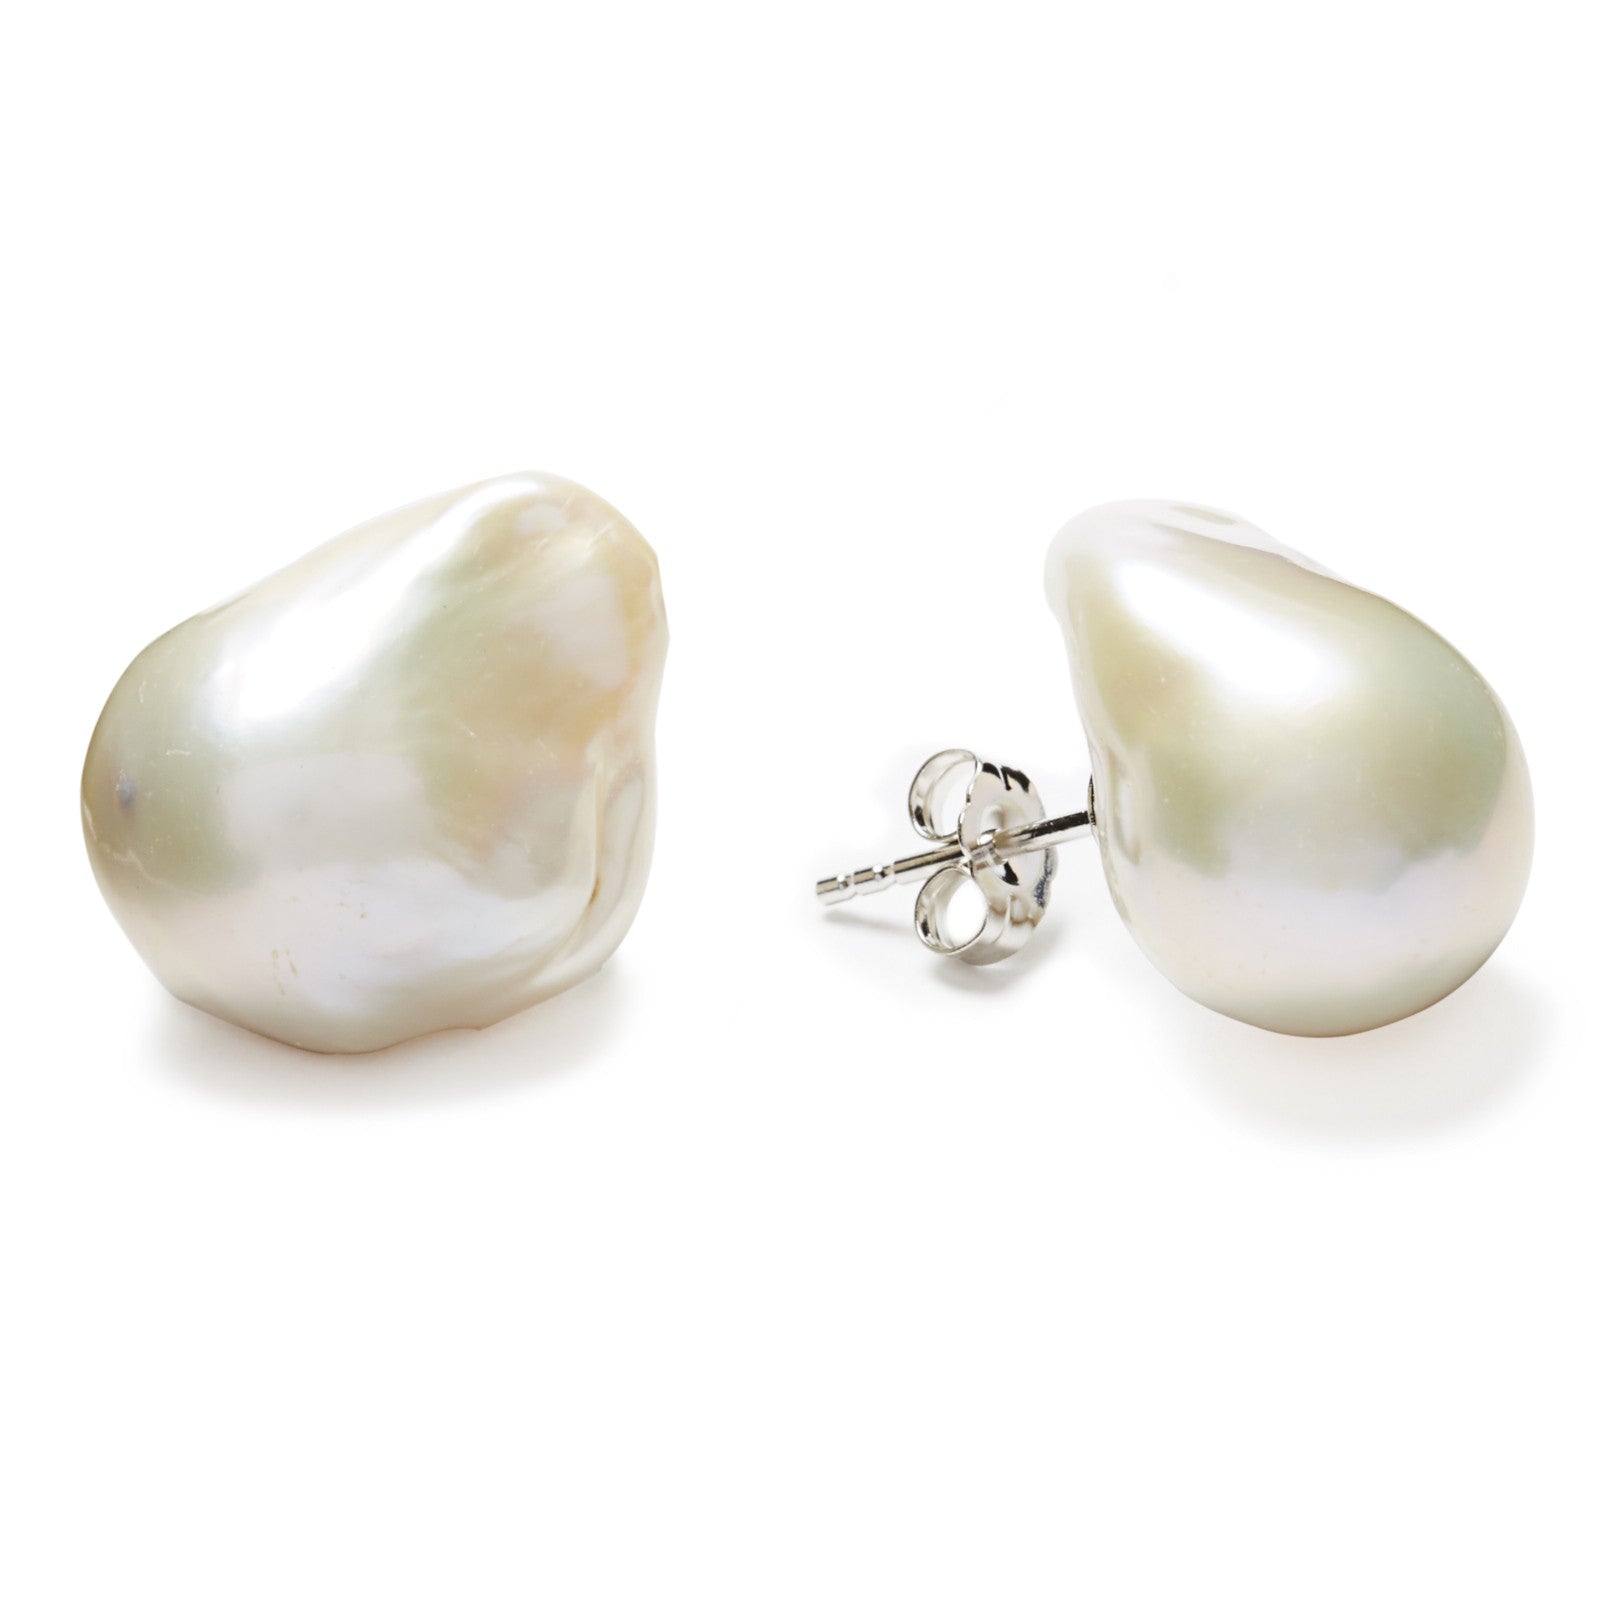 Sparkling Pearl charms 10mm - earrings, pendants, bracelets, rings,  necklaces, jewelry, presents for women, elements